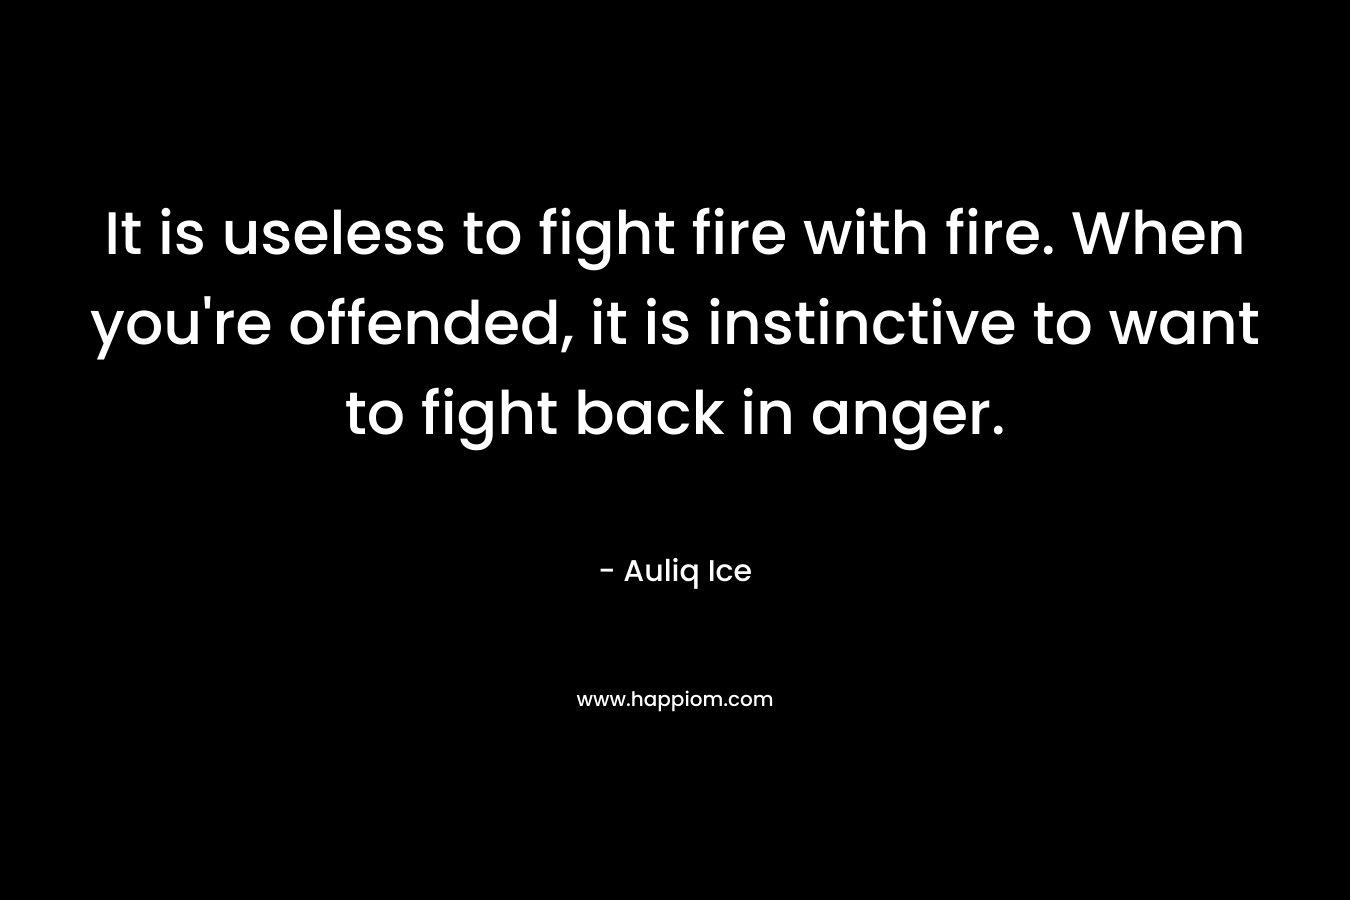 It is useless to fight fire with fire. When you're offended, it is instinctive to want to fight back in anger.